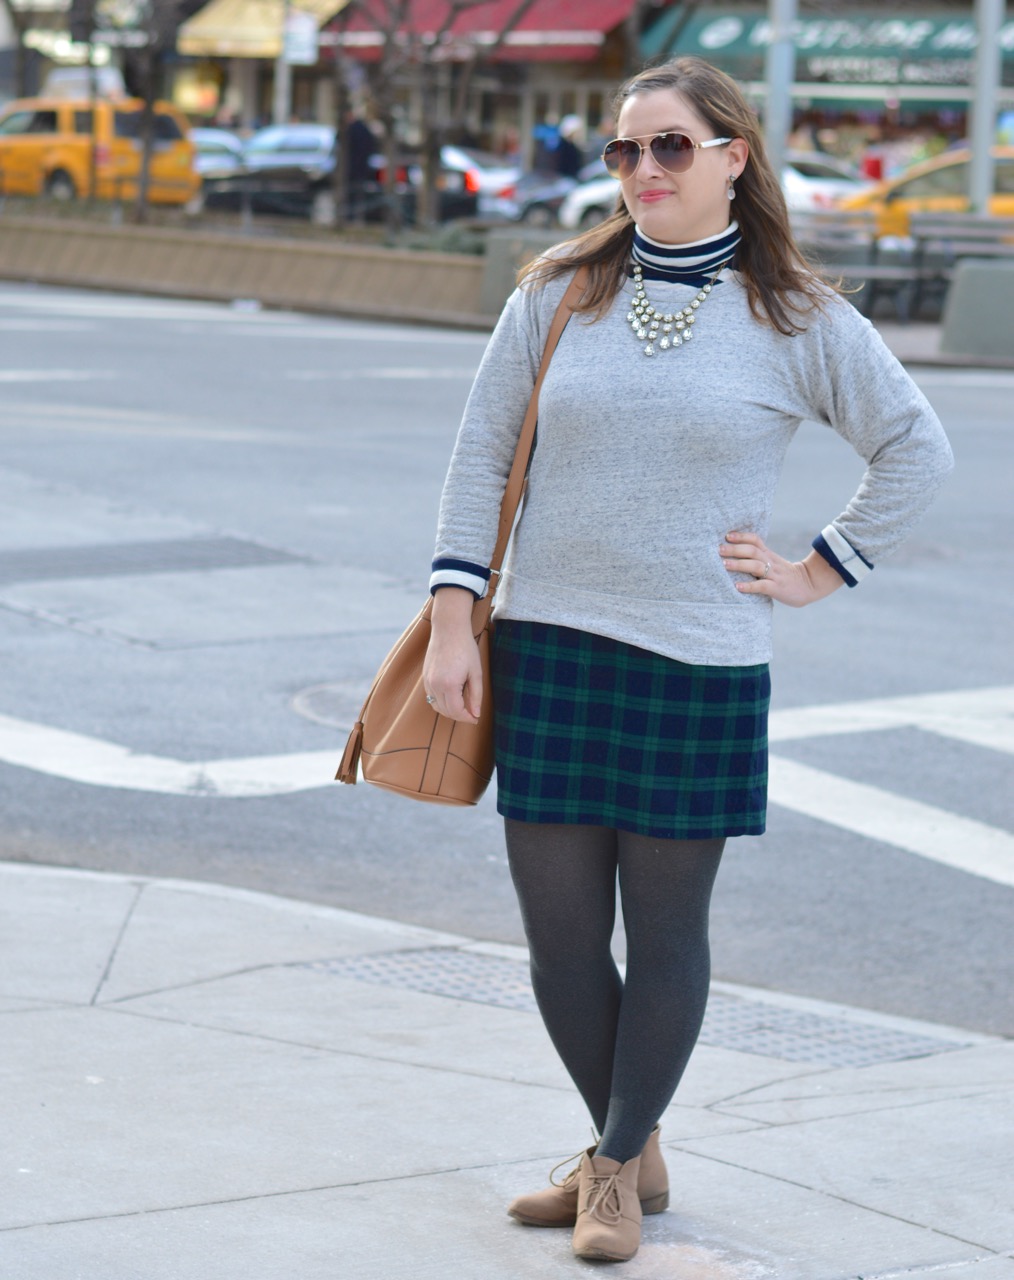 How to style a plaid skirt